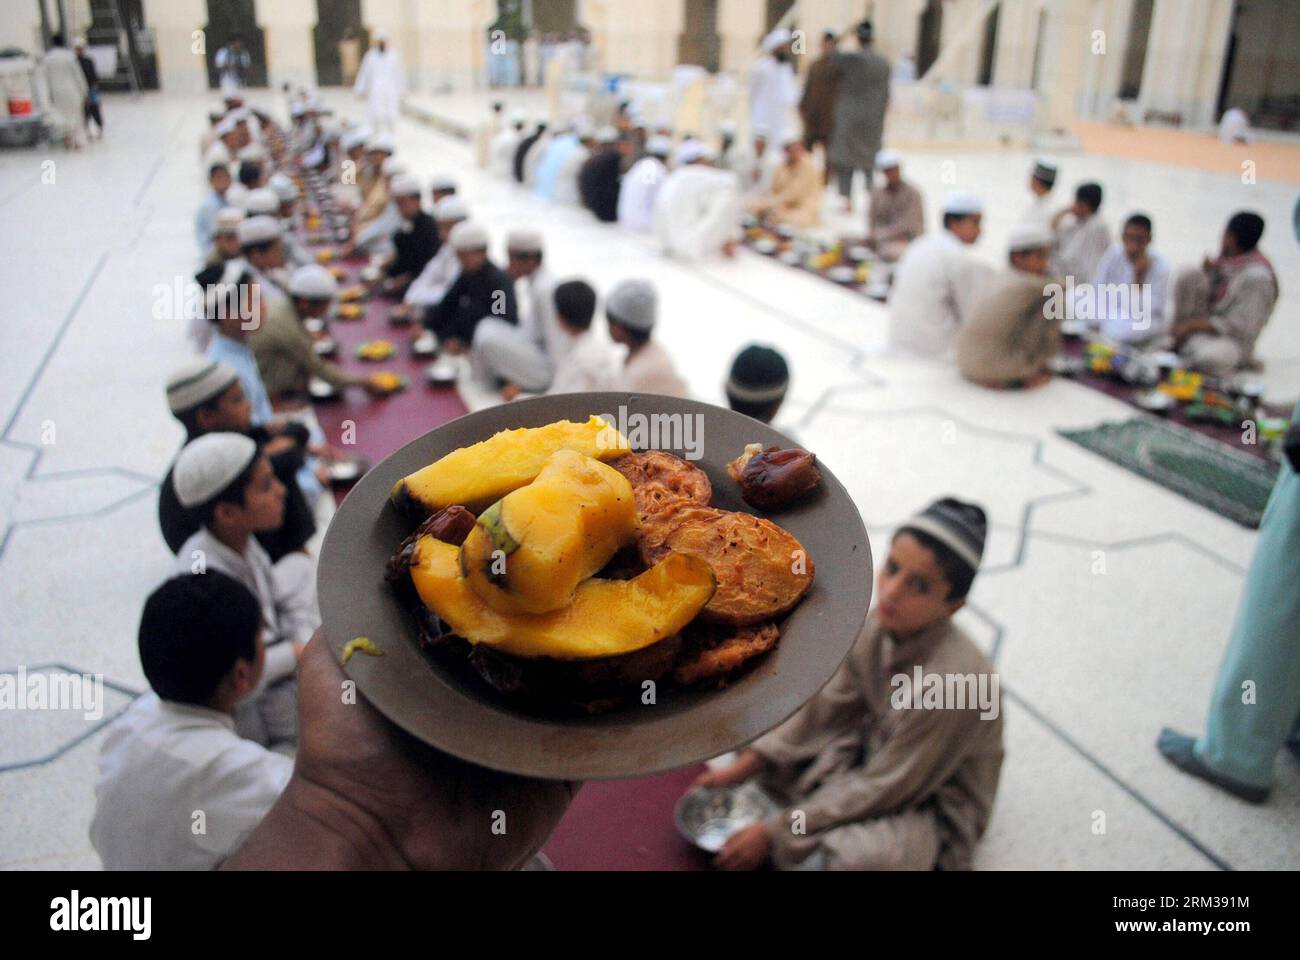 Bildnummer: 60111927  Datum: 11.07.2013  Copyright: imago/Xinhua (130711) -- PESHAWAR, July 11, 2013 (Xinhua) -- A Pakistani volunteer distributes Iftar for Muslim devotees at a mosque during the first day of the Muslim fasting month of Ramadan in northwest Pakistan s Peshawar on July 11, 2013. Iftar refers to the evening meal when Muslims break their fast during the holly month of Ramadan, a season of fasting and spiritual reflection. (Xinhua/Umar Qayyum) PAKISTAN-PESHAWAR-RAMADAN-IFTAR PUBLICATIONxNOTxINxCHN Gesellschaft Religion Islam Muslim Ramadan Fasten Fastenmonat Iftar Fastenbrechen Fe Stock Photo